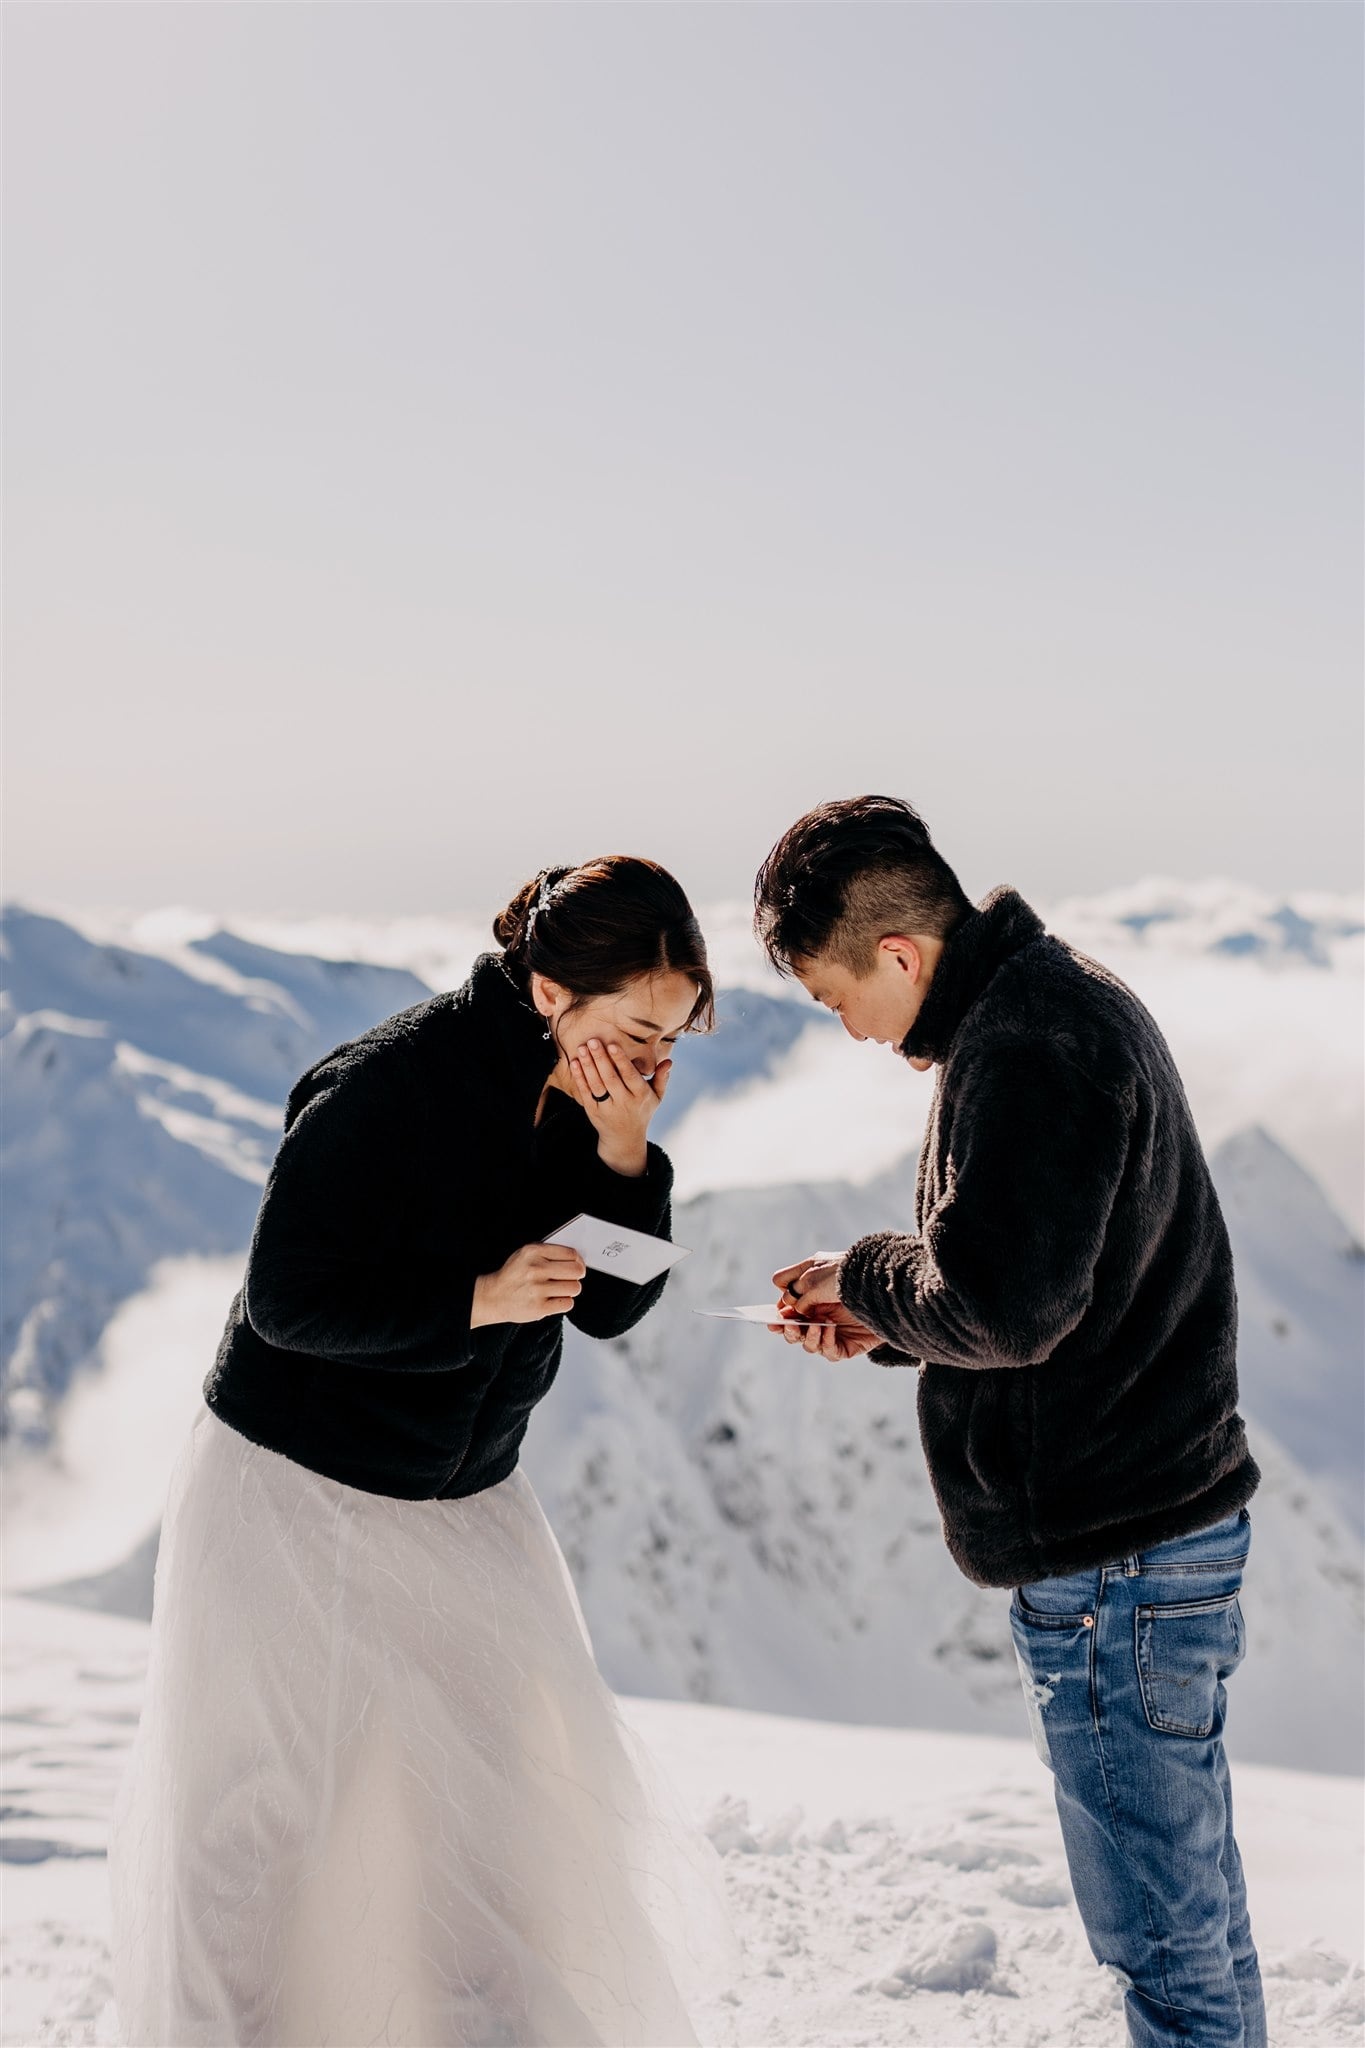 squamish-helicopter-elopement-aileen-choi-photo-stephany-like-5-min